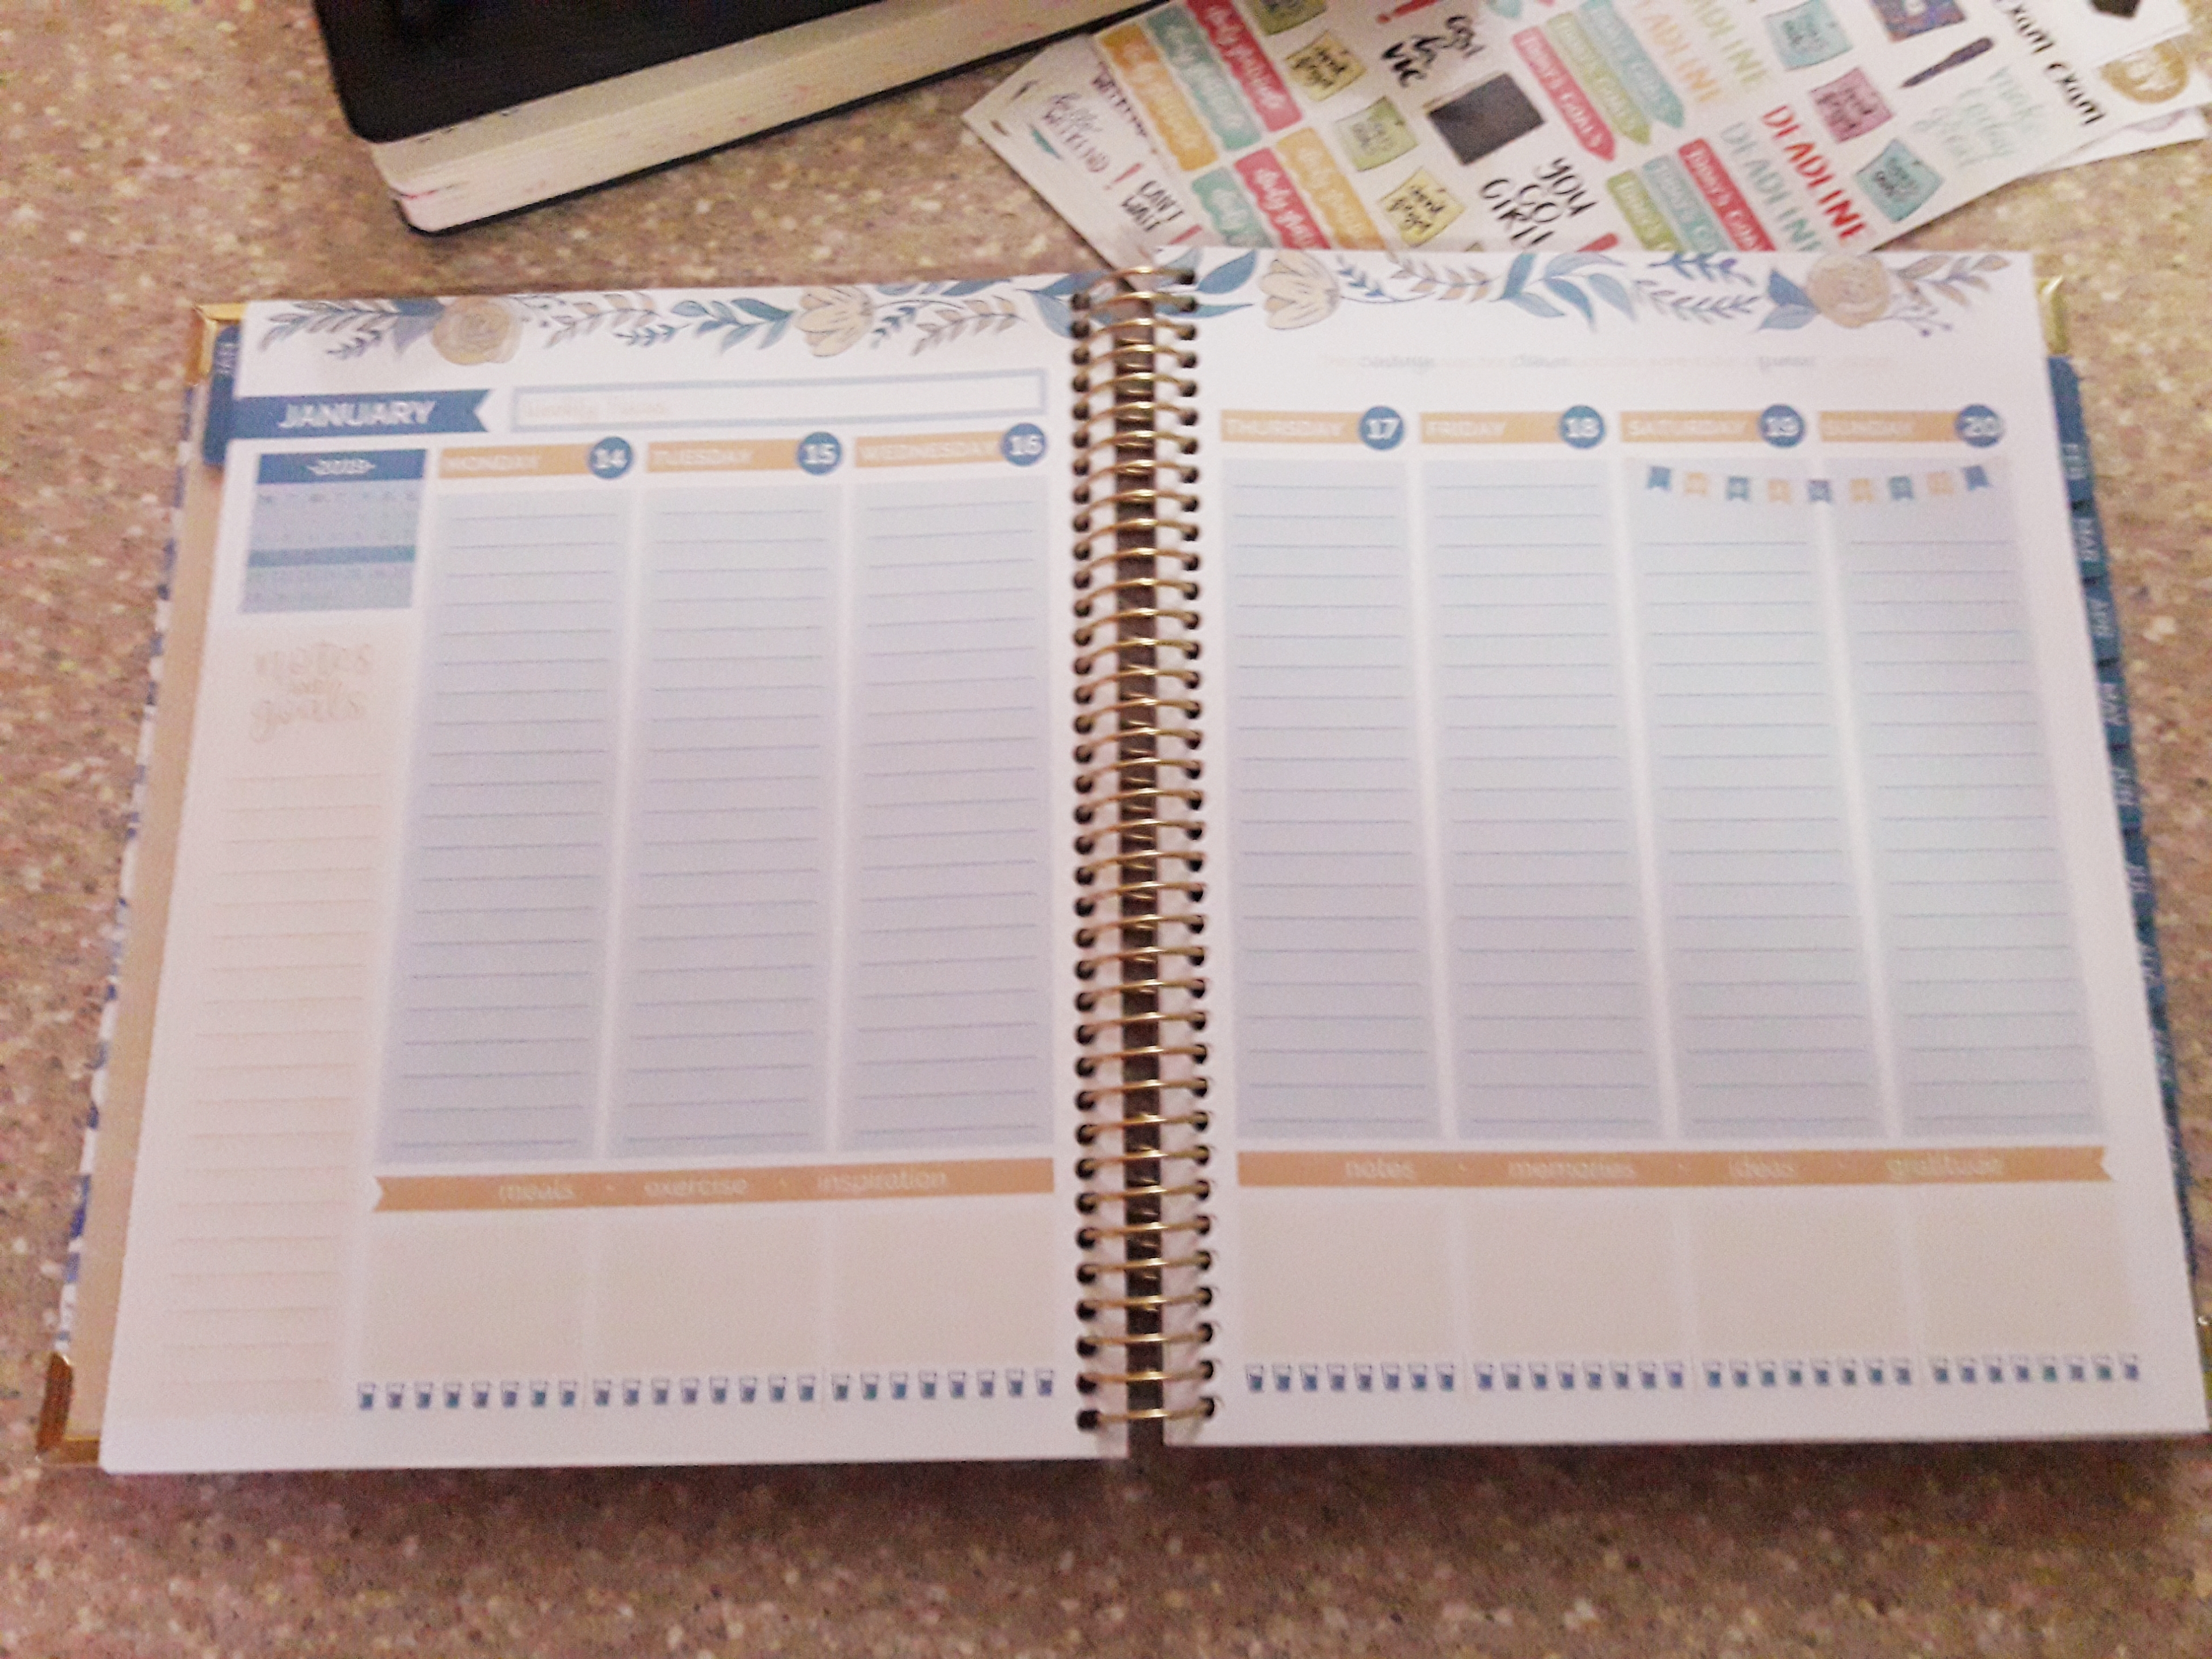 bloom daily vision planner third week in January spread